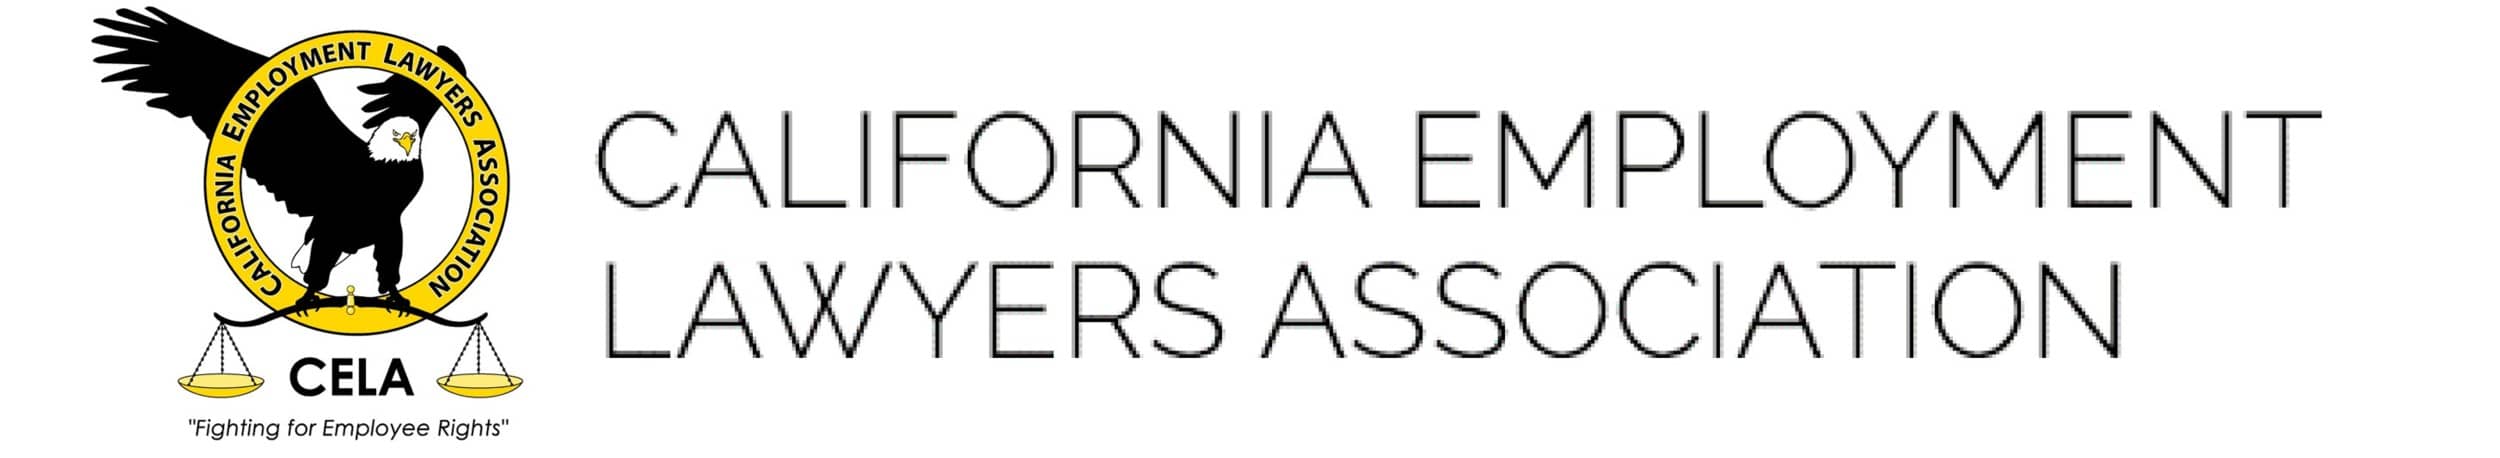 CELA | California Employment Lawyers Association | Fighting For Employee Rights